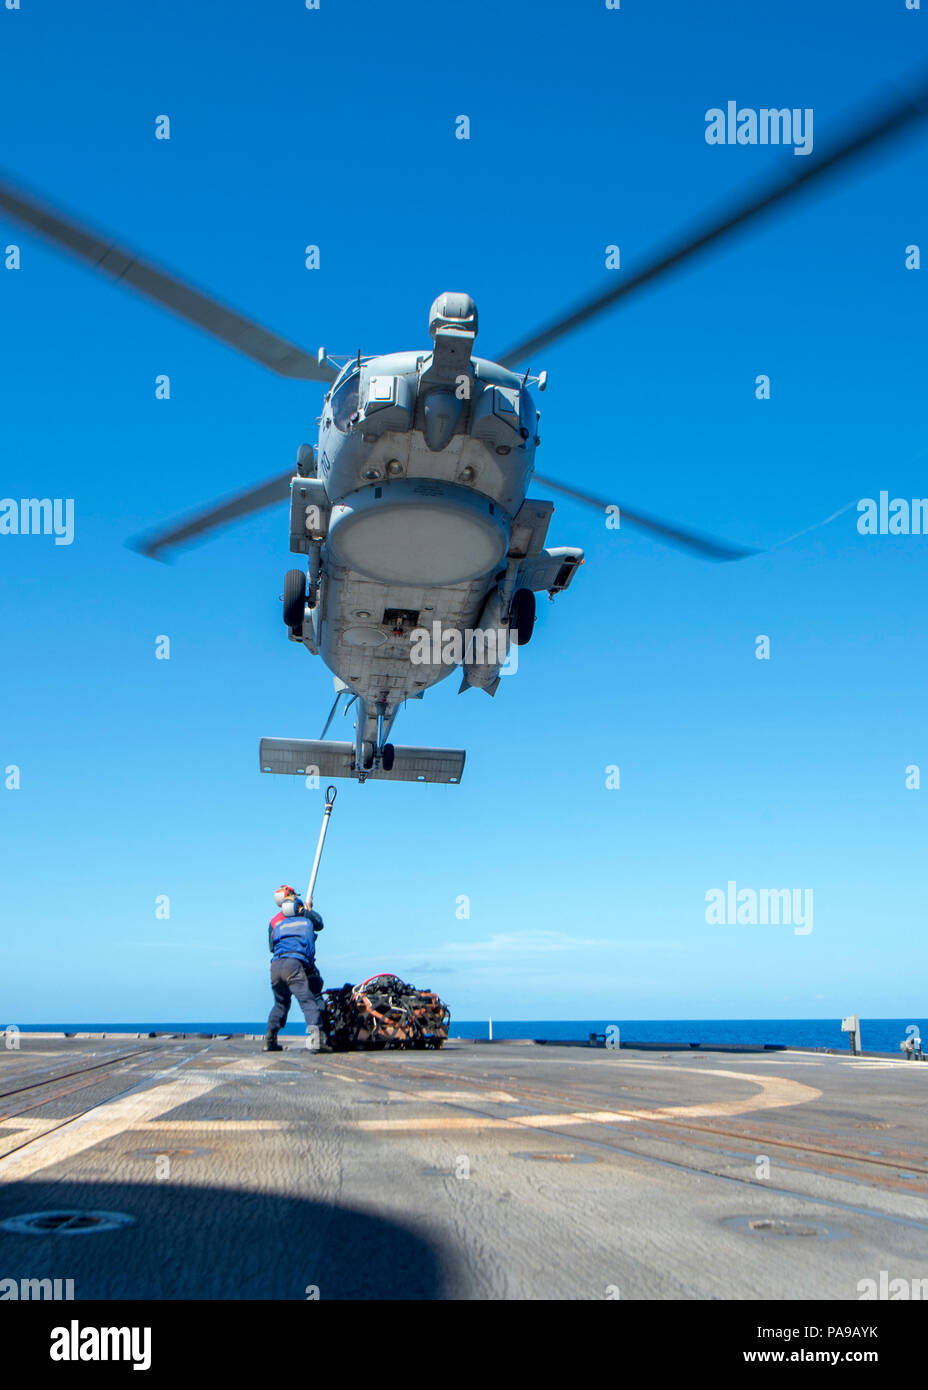 180720-N-HE318-1120 PHILIPPINE SEA (July 20, 2018) Sailors assigned to the Ticonderoga-class guided-missile cruiser USS Antietam (CG 54) prepare to attach a cargo hook to a MH-60R Sea Hawk helicopter, assigned to the “Warlords” of Helicopter Maritime Strike Squadron (HSM) 51, as it hovers above the ship’s flight deck. Antietam is forward-deployed in the U.S. 7th Fleet area of operations in support of security and stability in the Indo-Pacific region. (U.S. Navy photo by Mass Communication Specialist 2nd Class William McCann/Released) Stock Photo